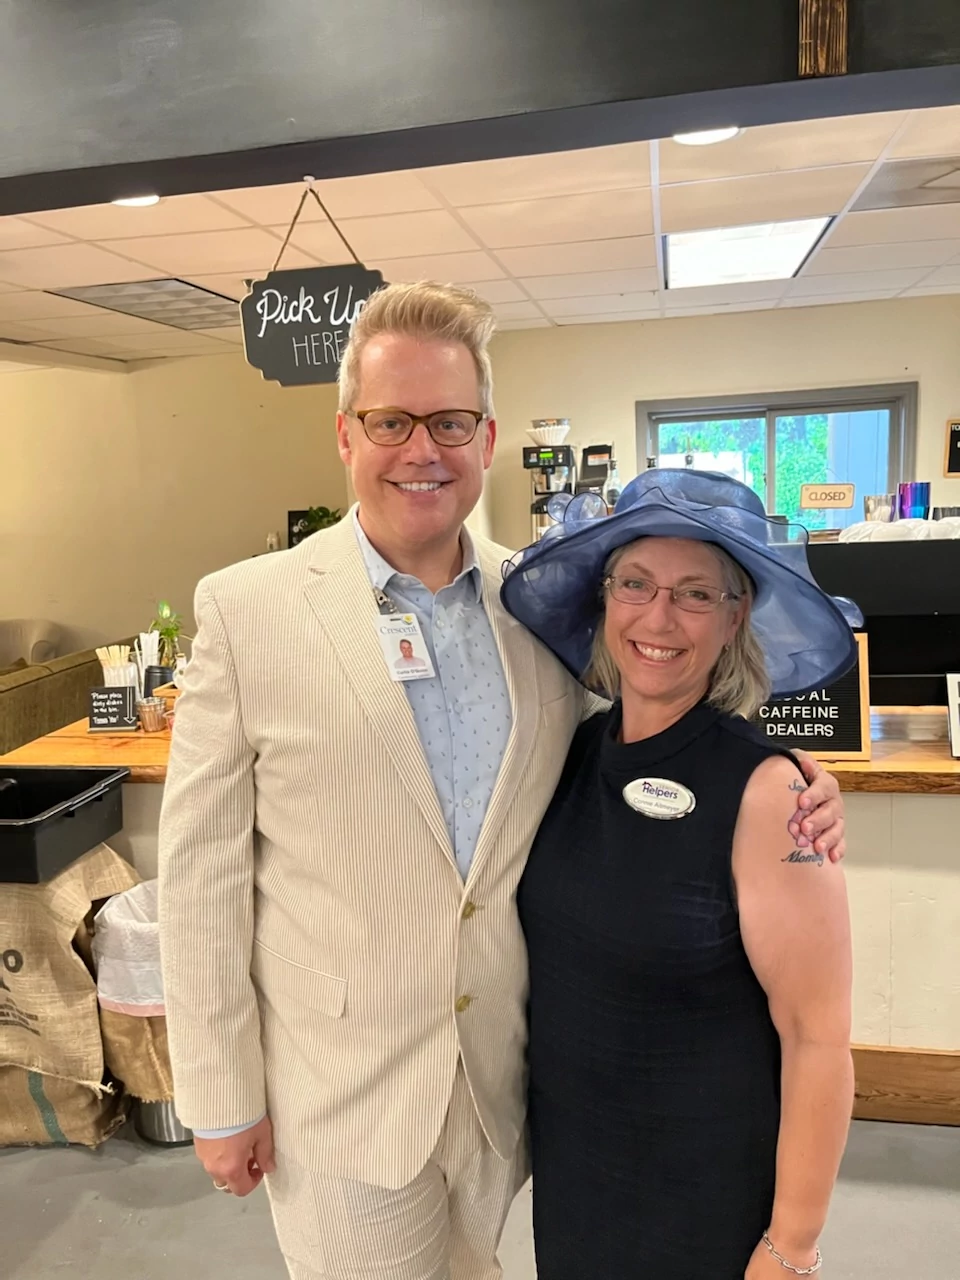 Kentucky Derby was a blast at The Grind Coffee Shop with Senior Helpers and Crescent Hospice.